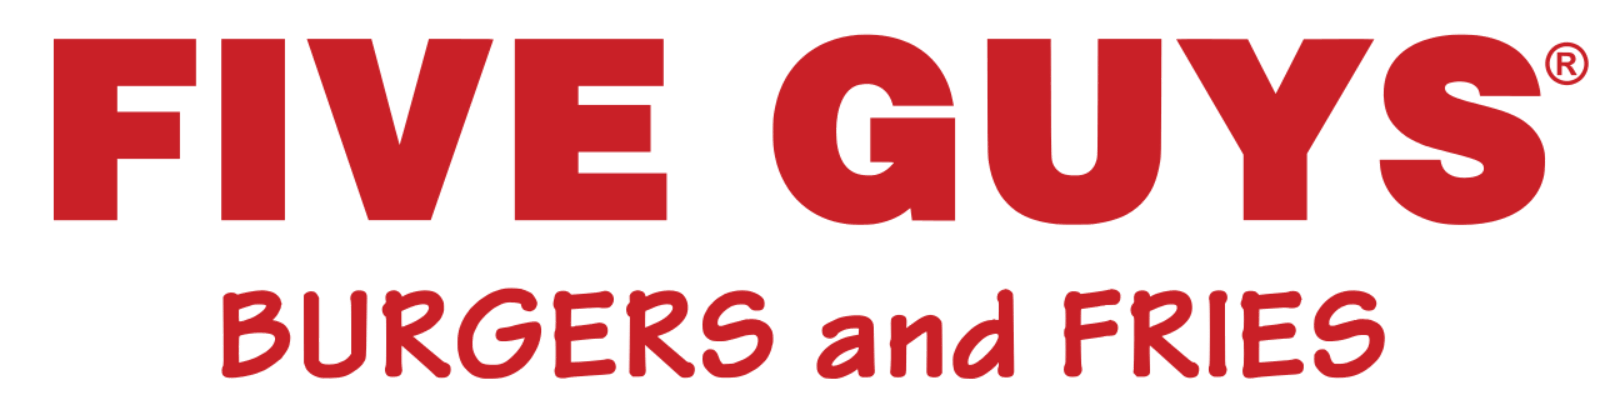 Five Guys Burgers and Fries Logo